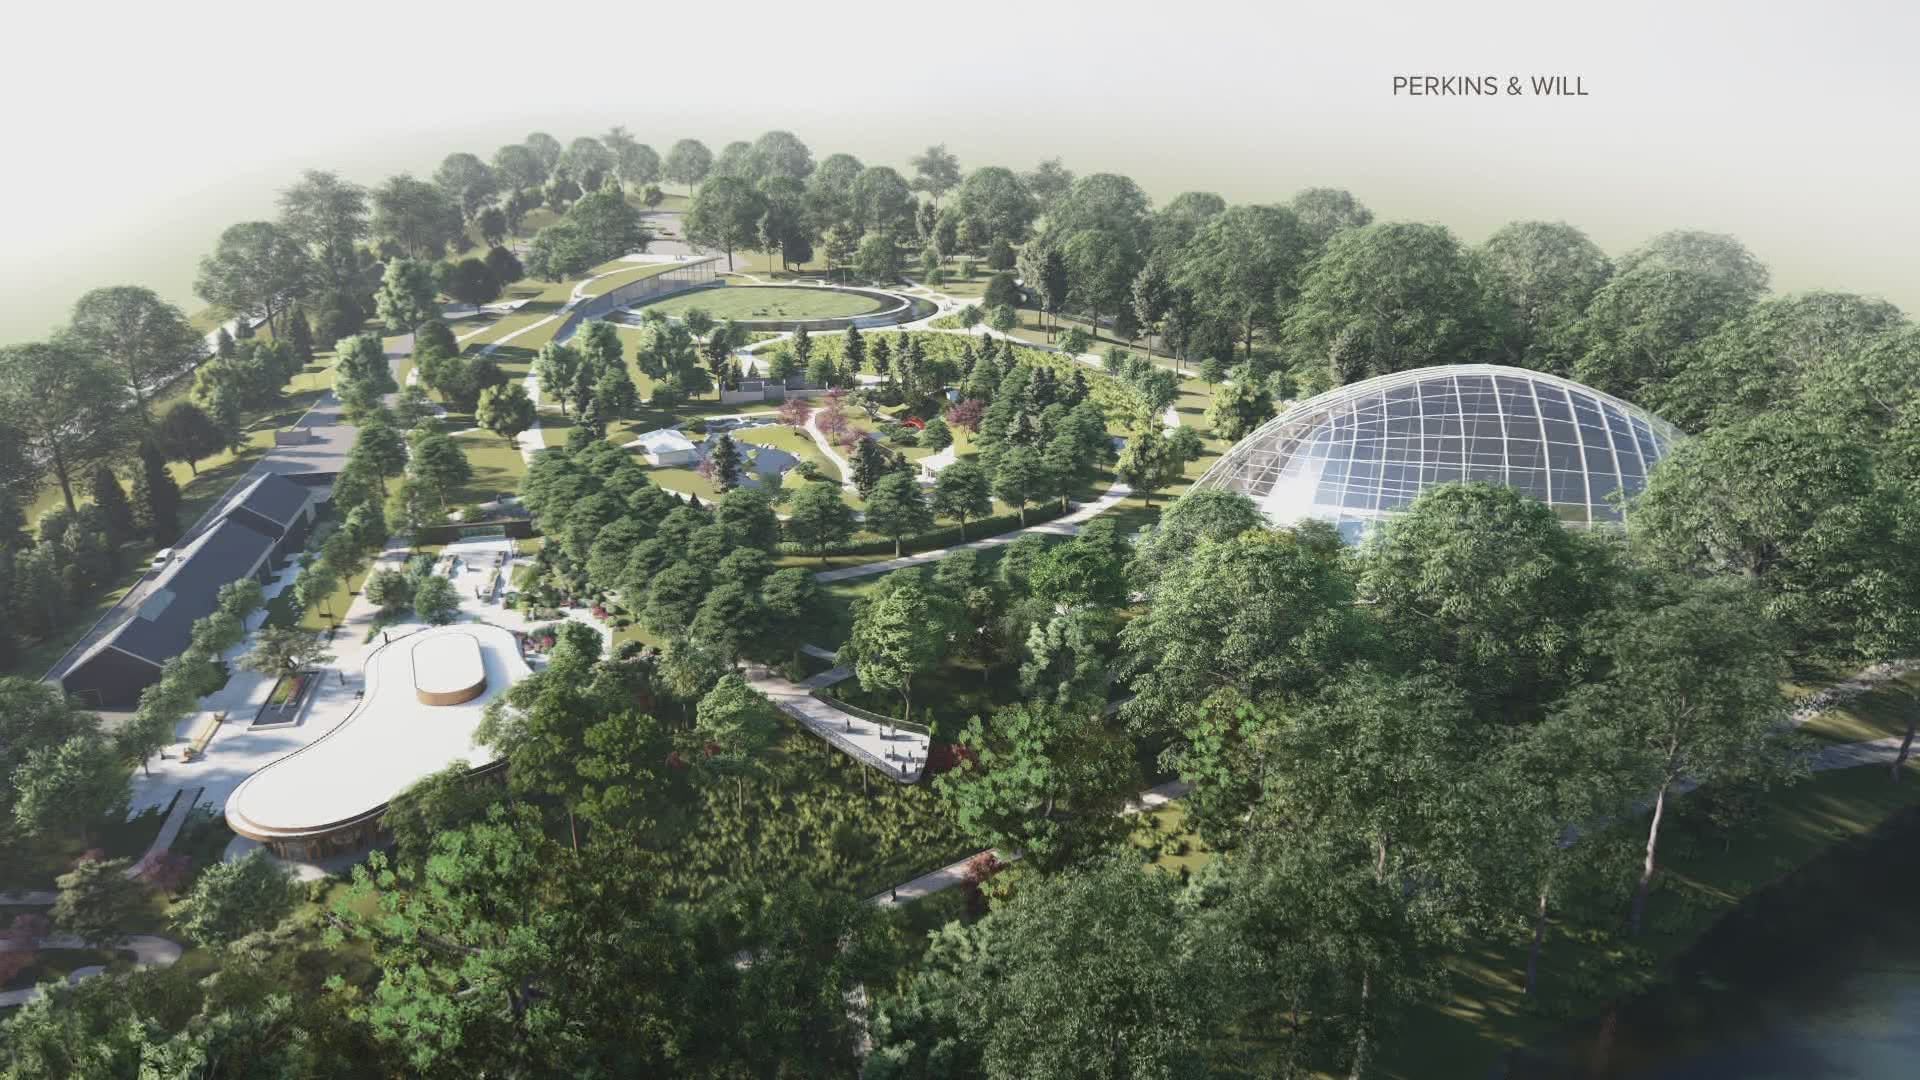 Here's a look at future changes the Waterfront Botanical Gardens in Louisville.